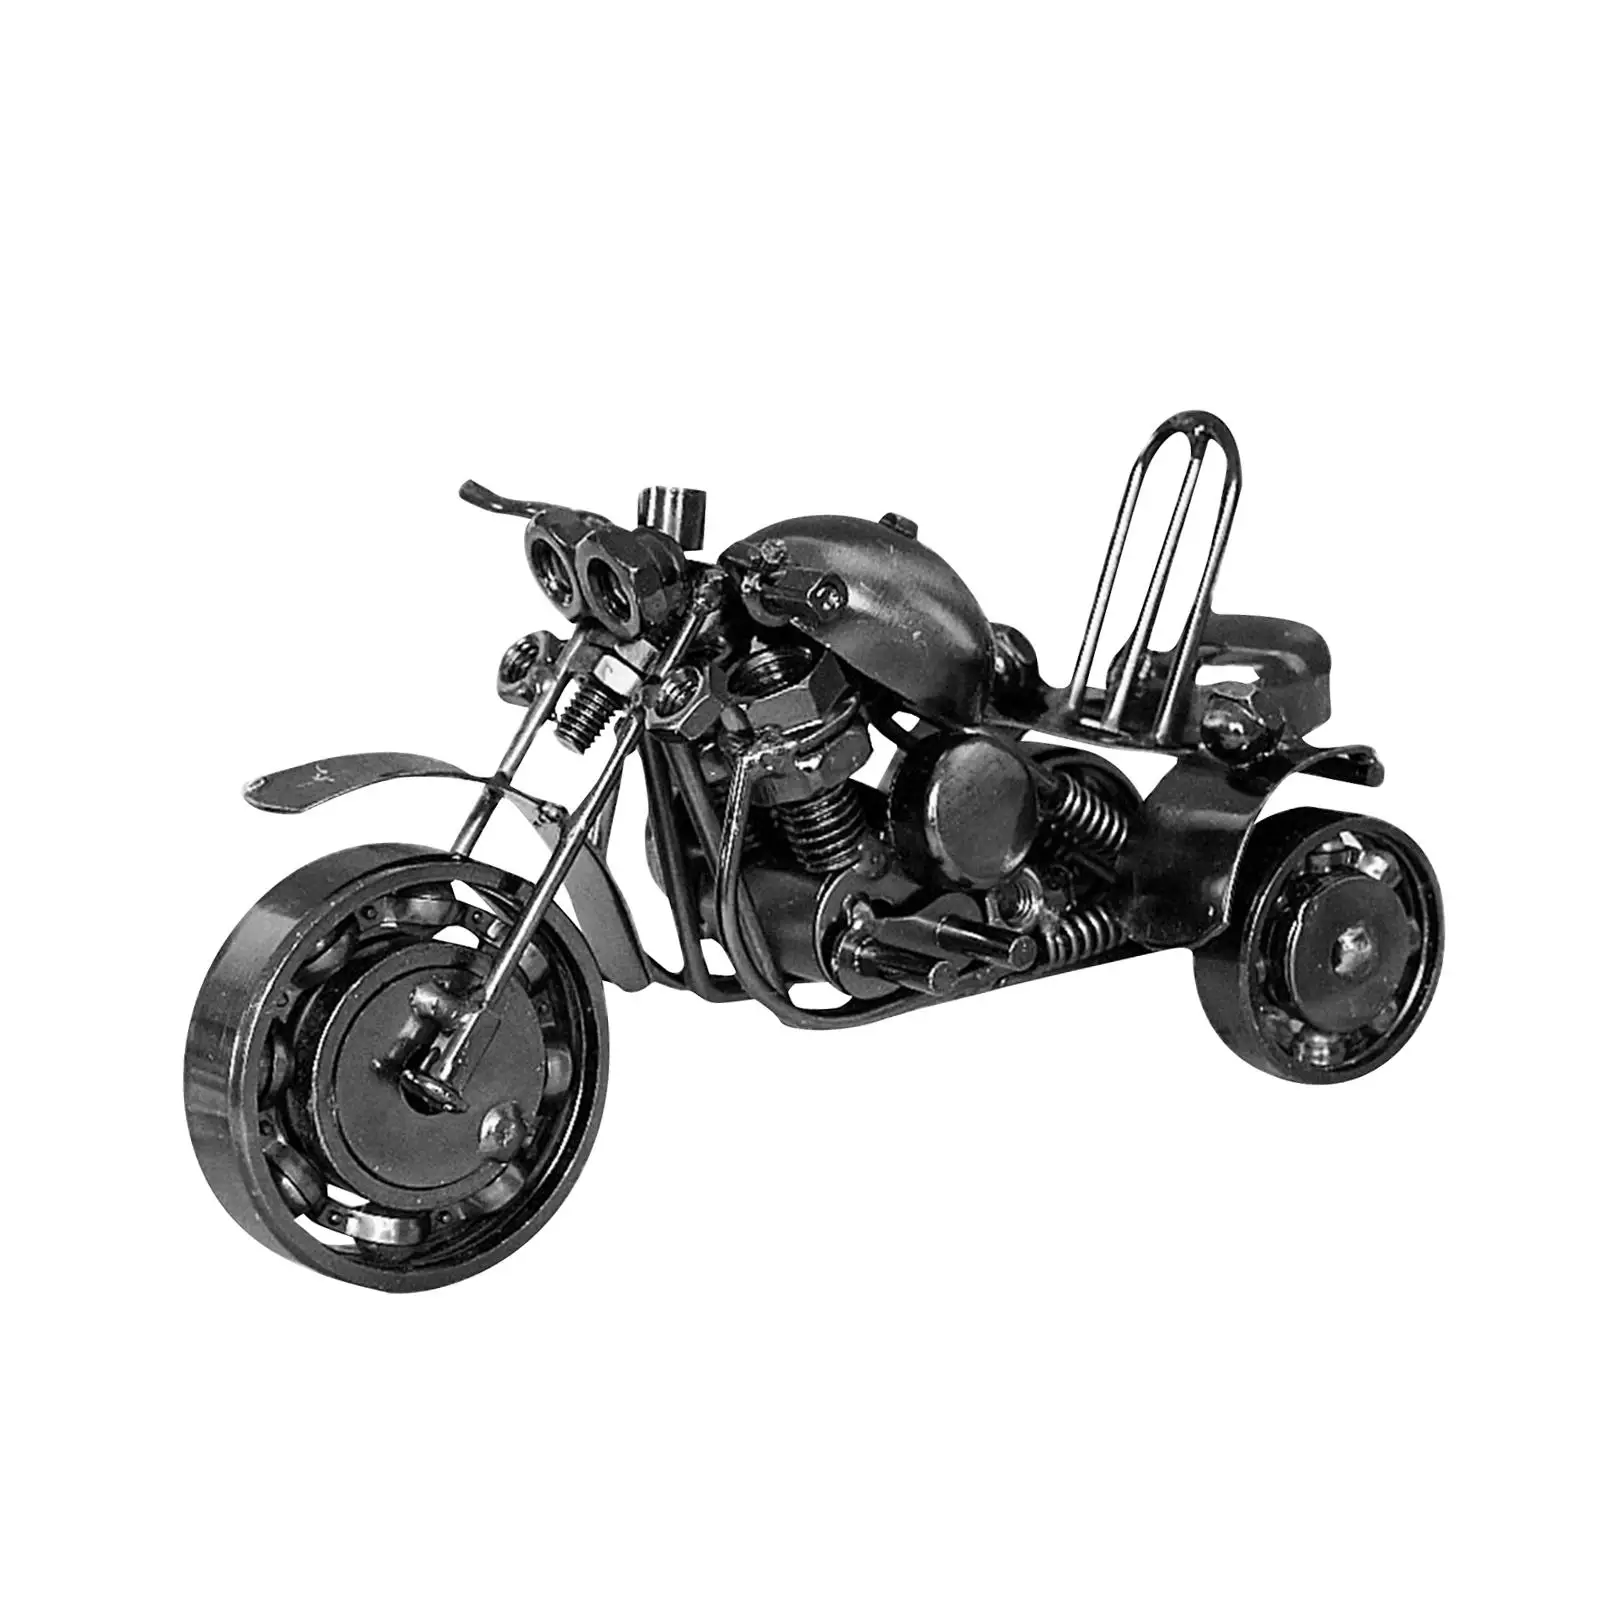 Motor Tricycle Iron Art Sculpture Motorcycle Model Classical Decorative 6.3x2.5x3.3inch for Office Decor Multifunctional Durable